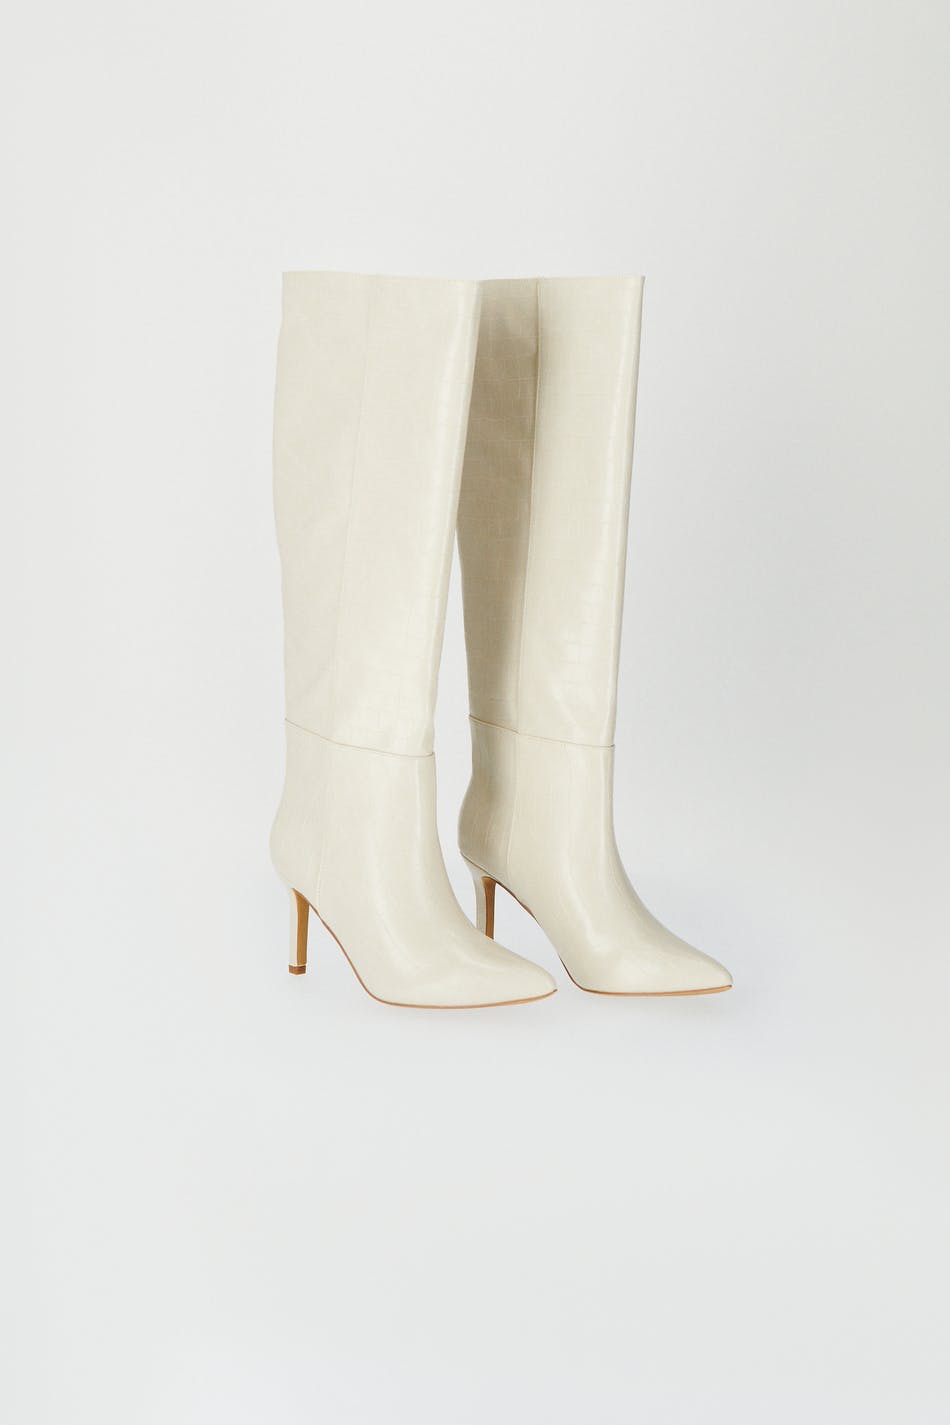 high boots - Gina Tricot